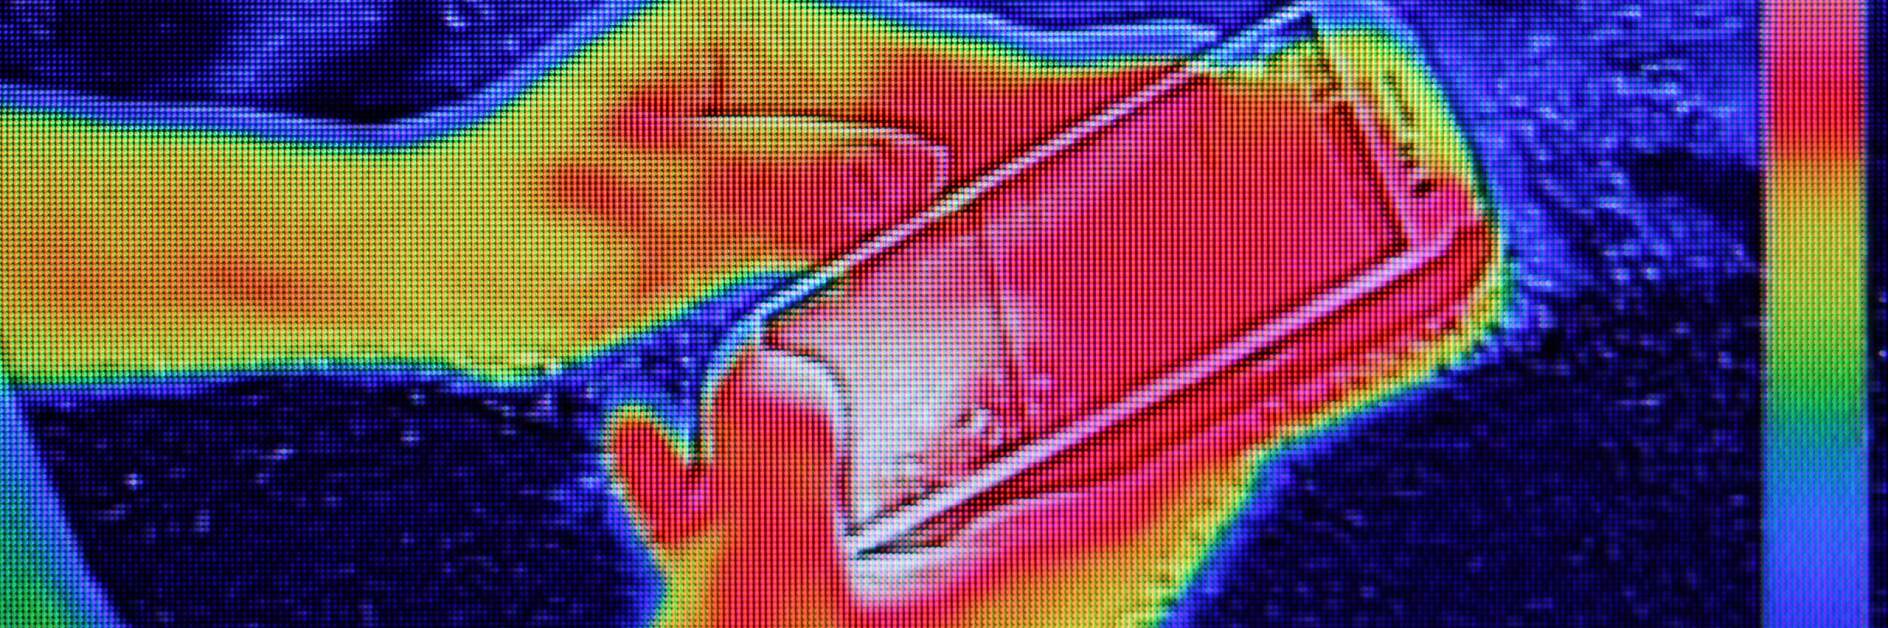 Infrared image showing the heat emission when Young girl used smartphone